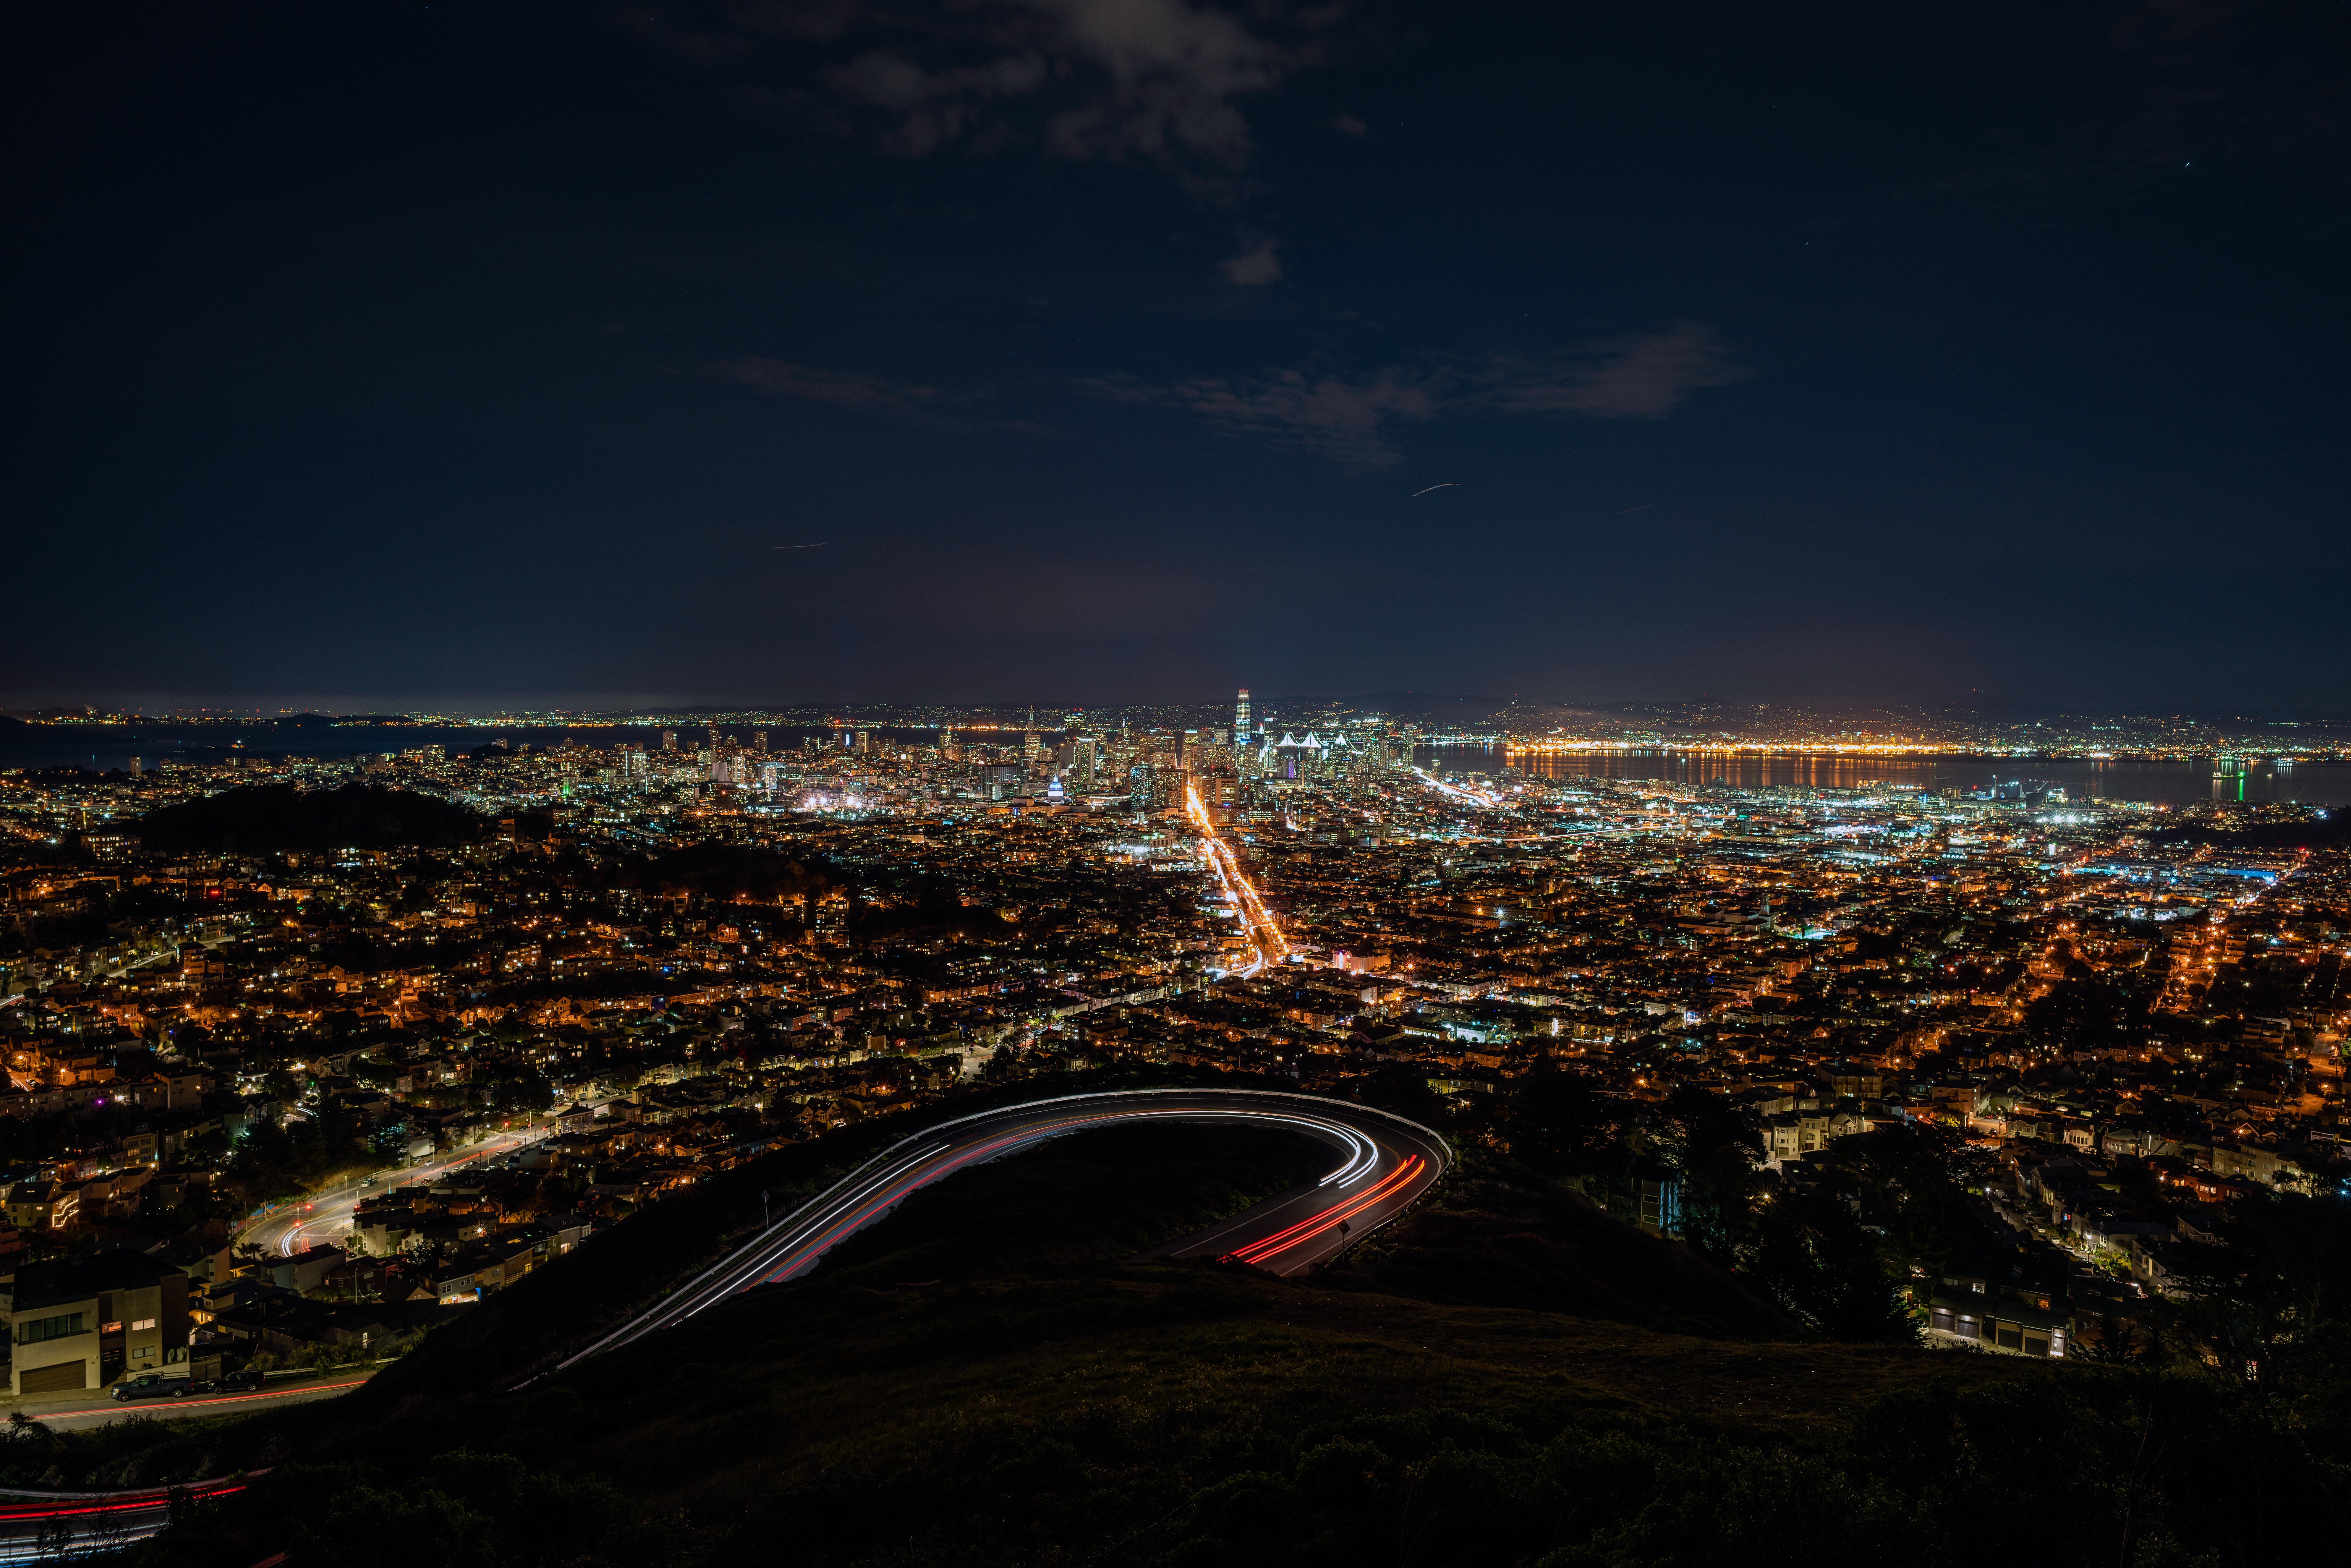 overview, cities, night, usa, view from above, night city, city lights, review, united states, san francisco